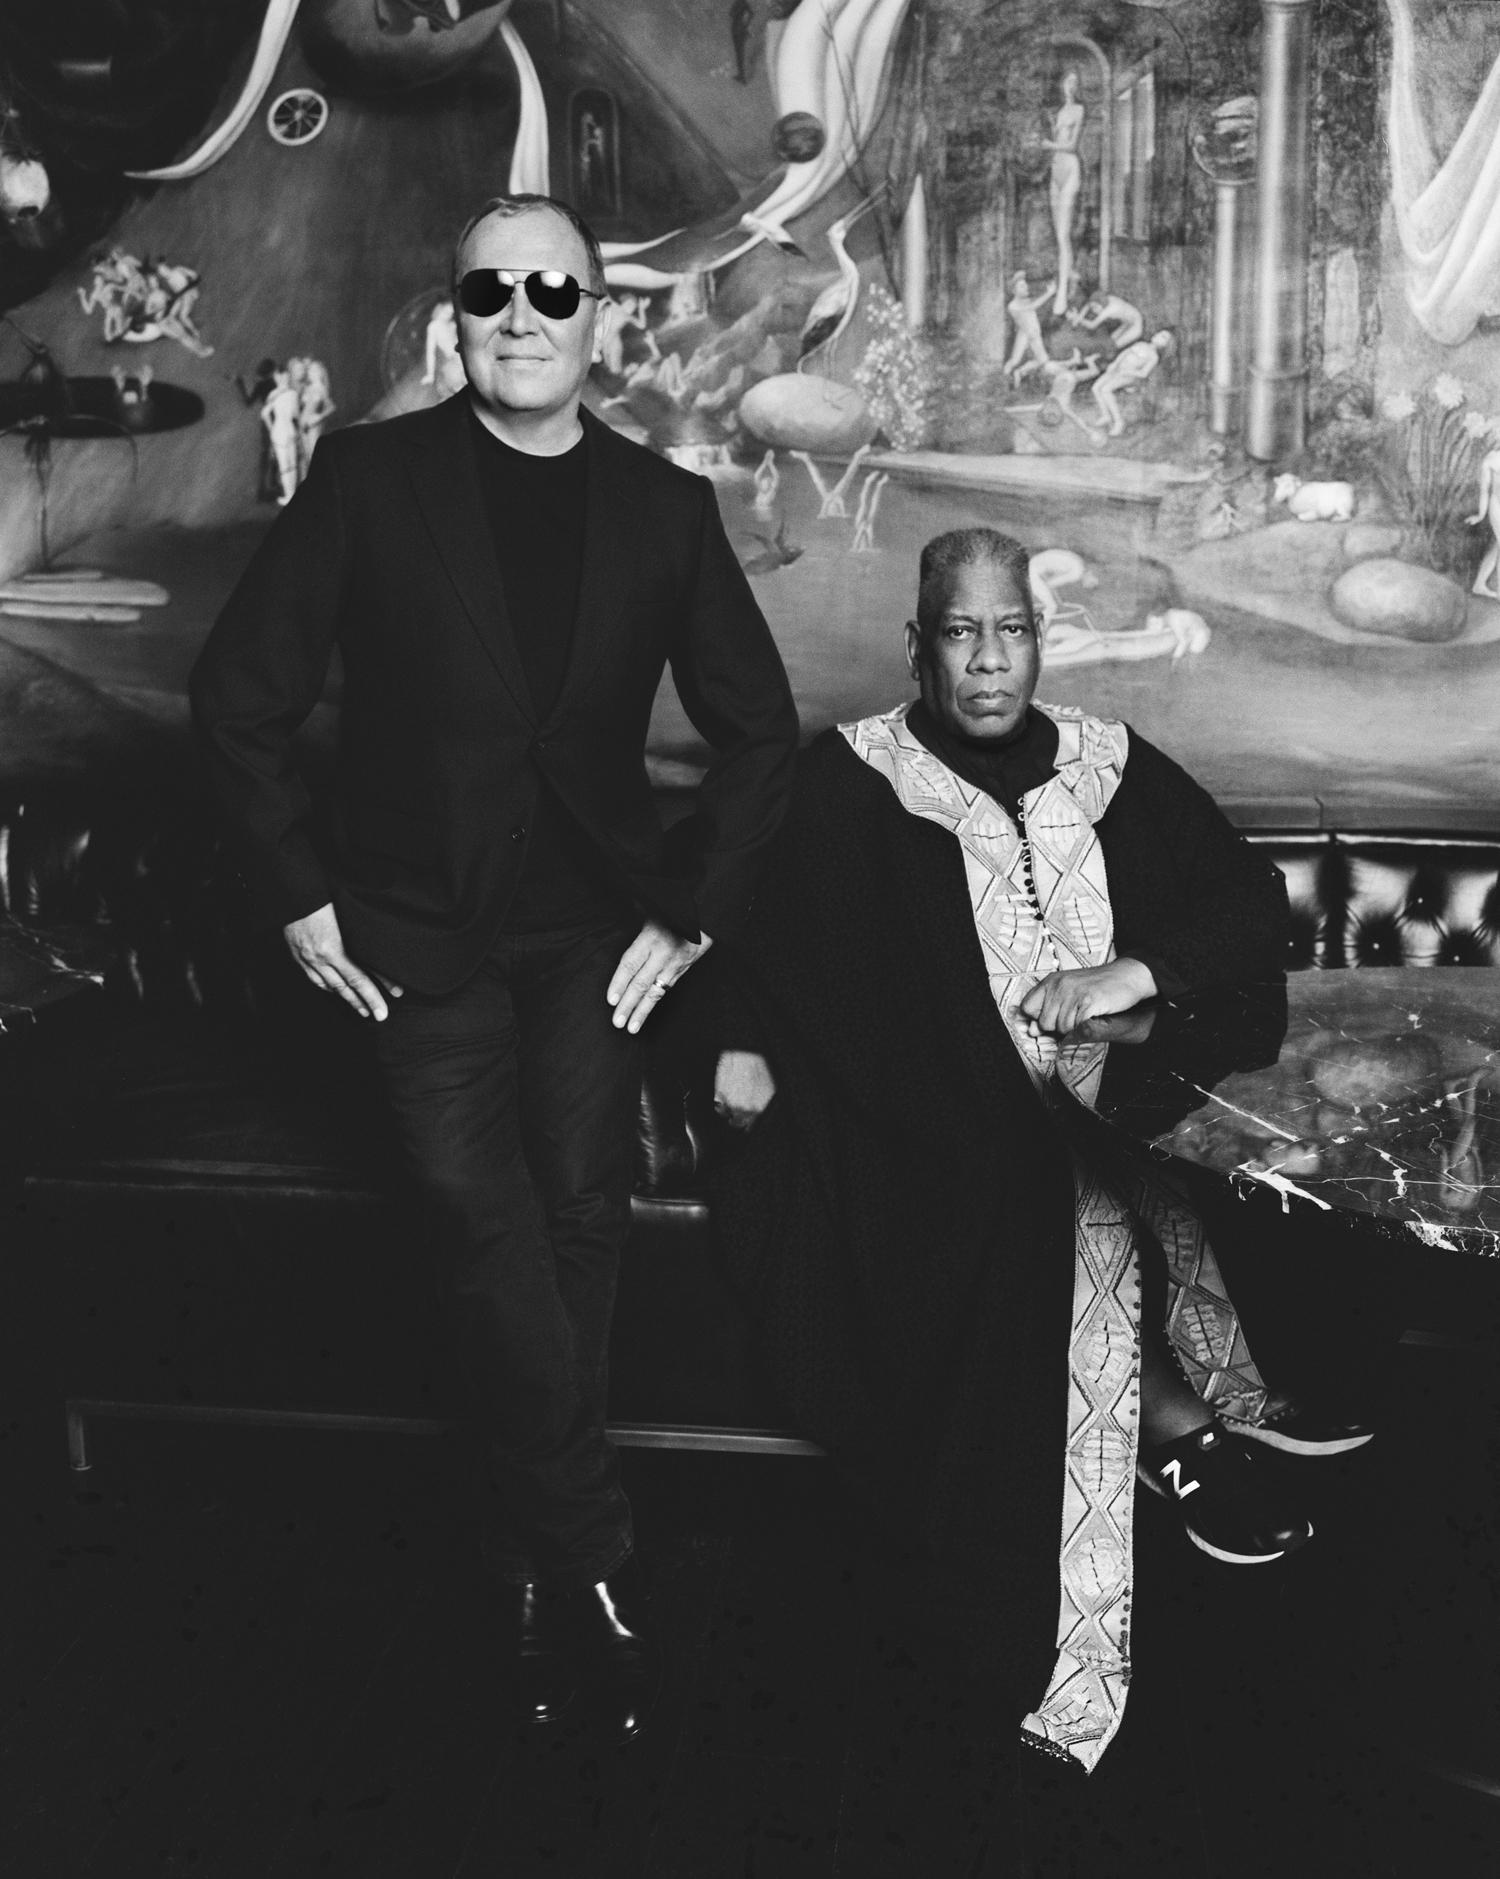 Michael Kors and André Leon Talley Hold Court Over The World of